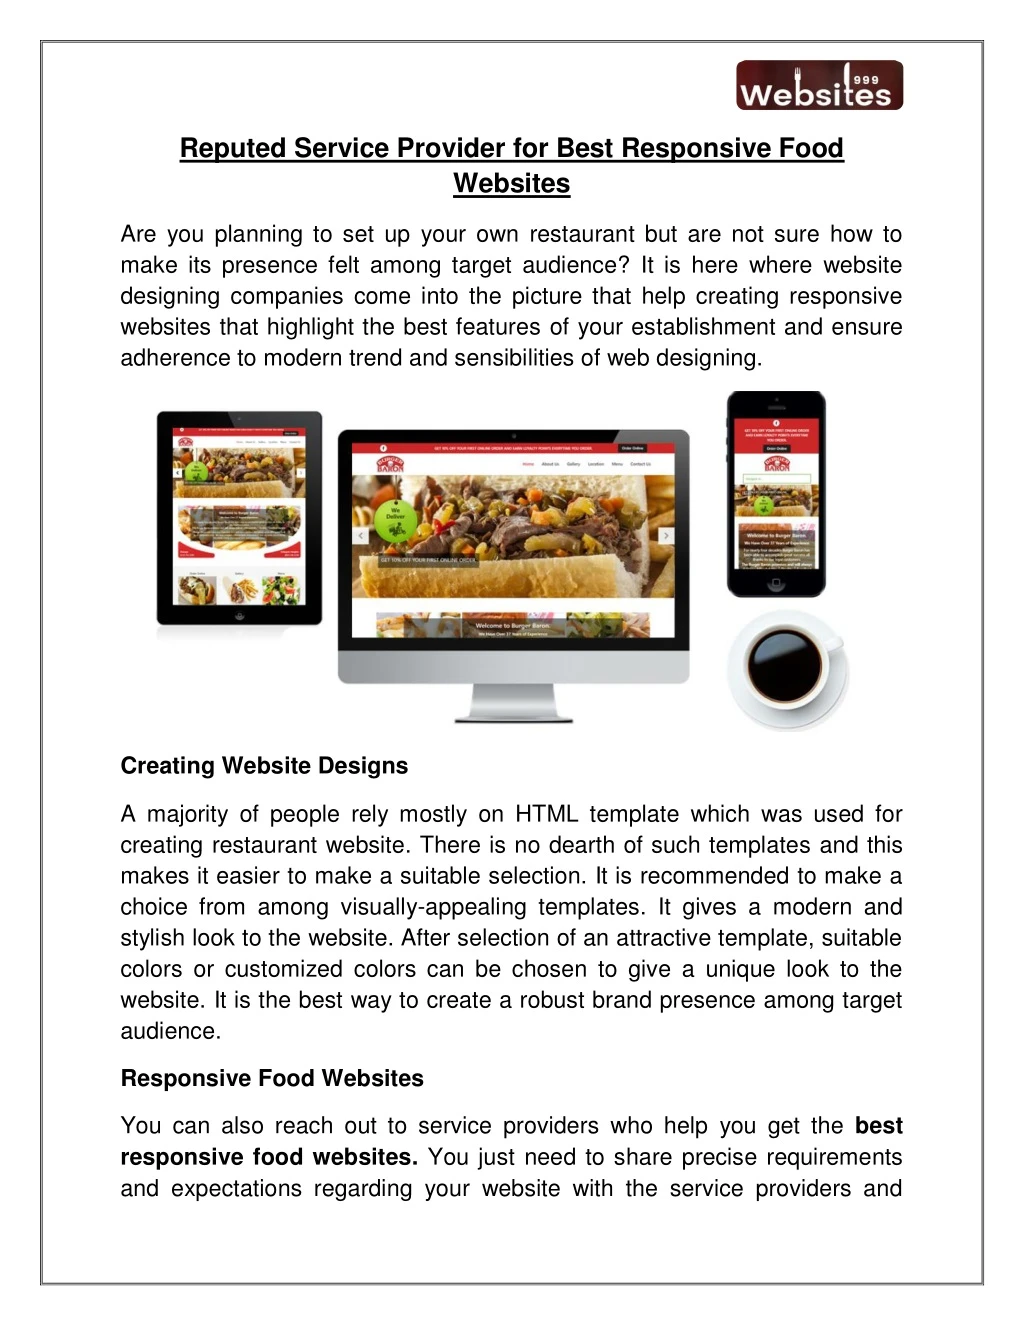 reputed service provider for best responsive food